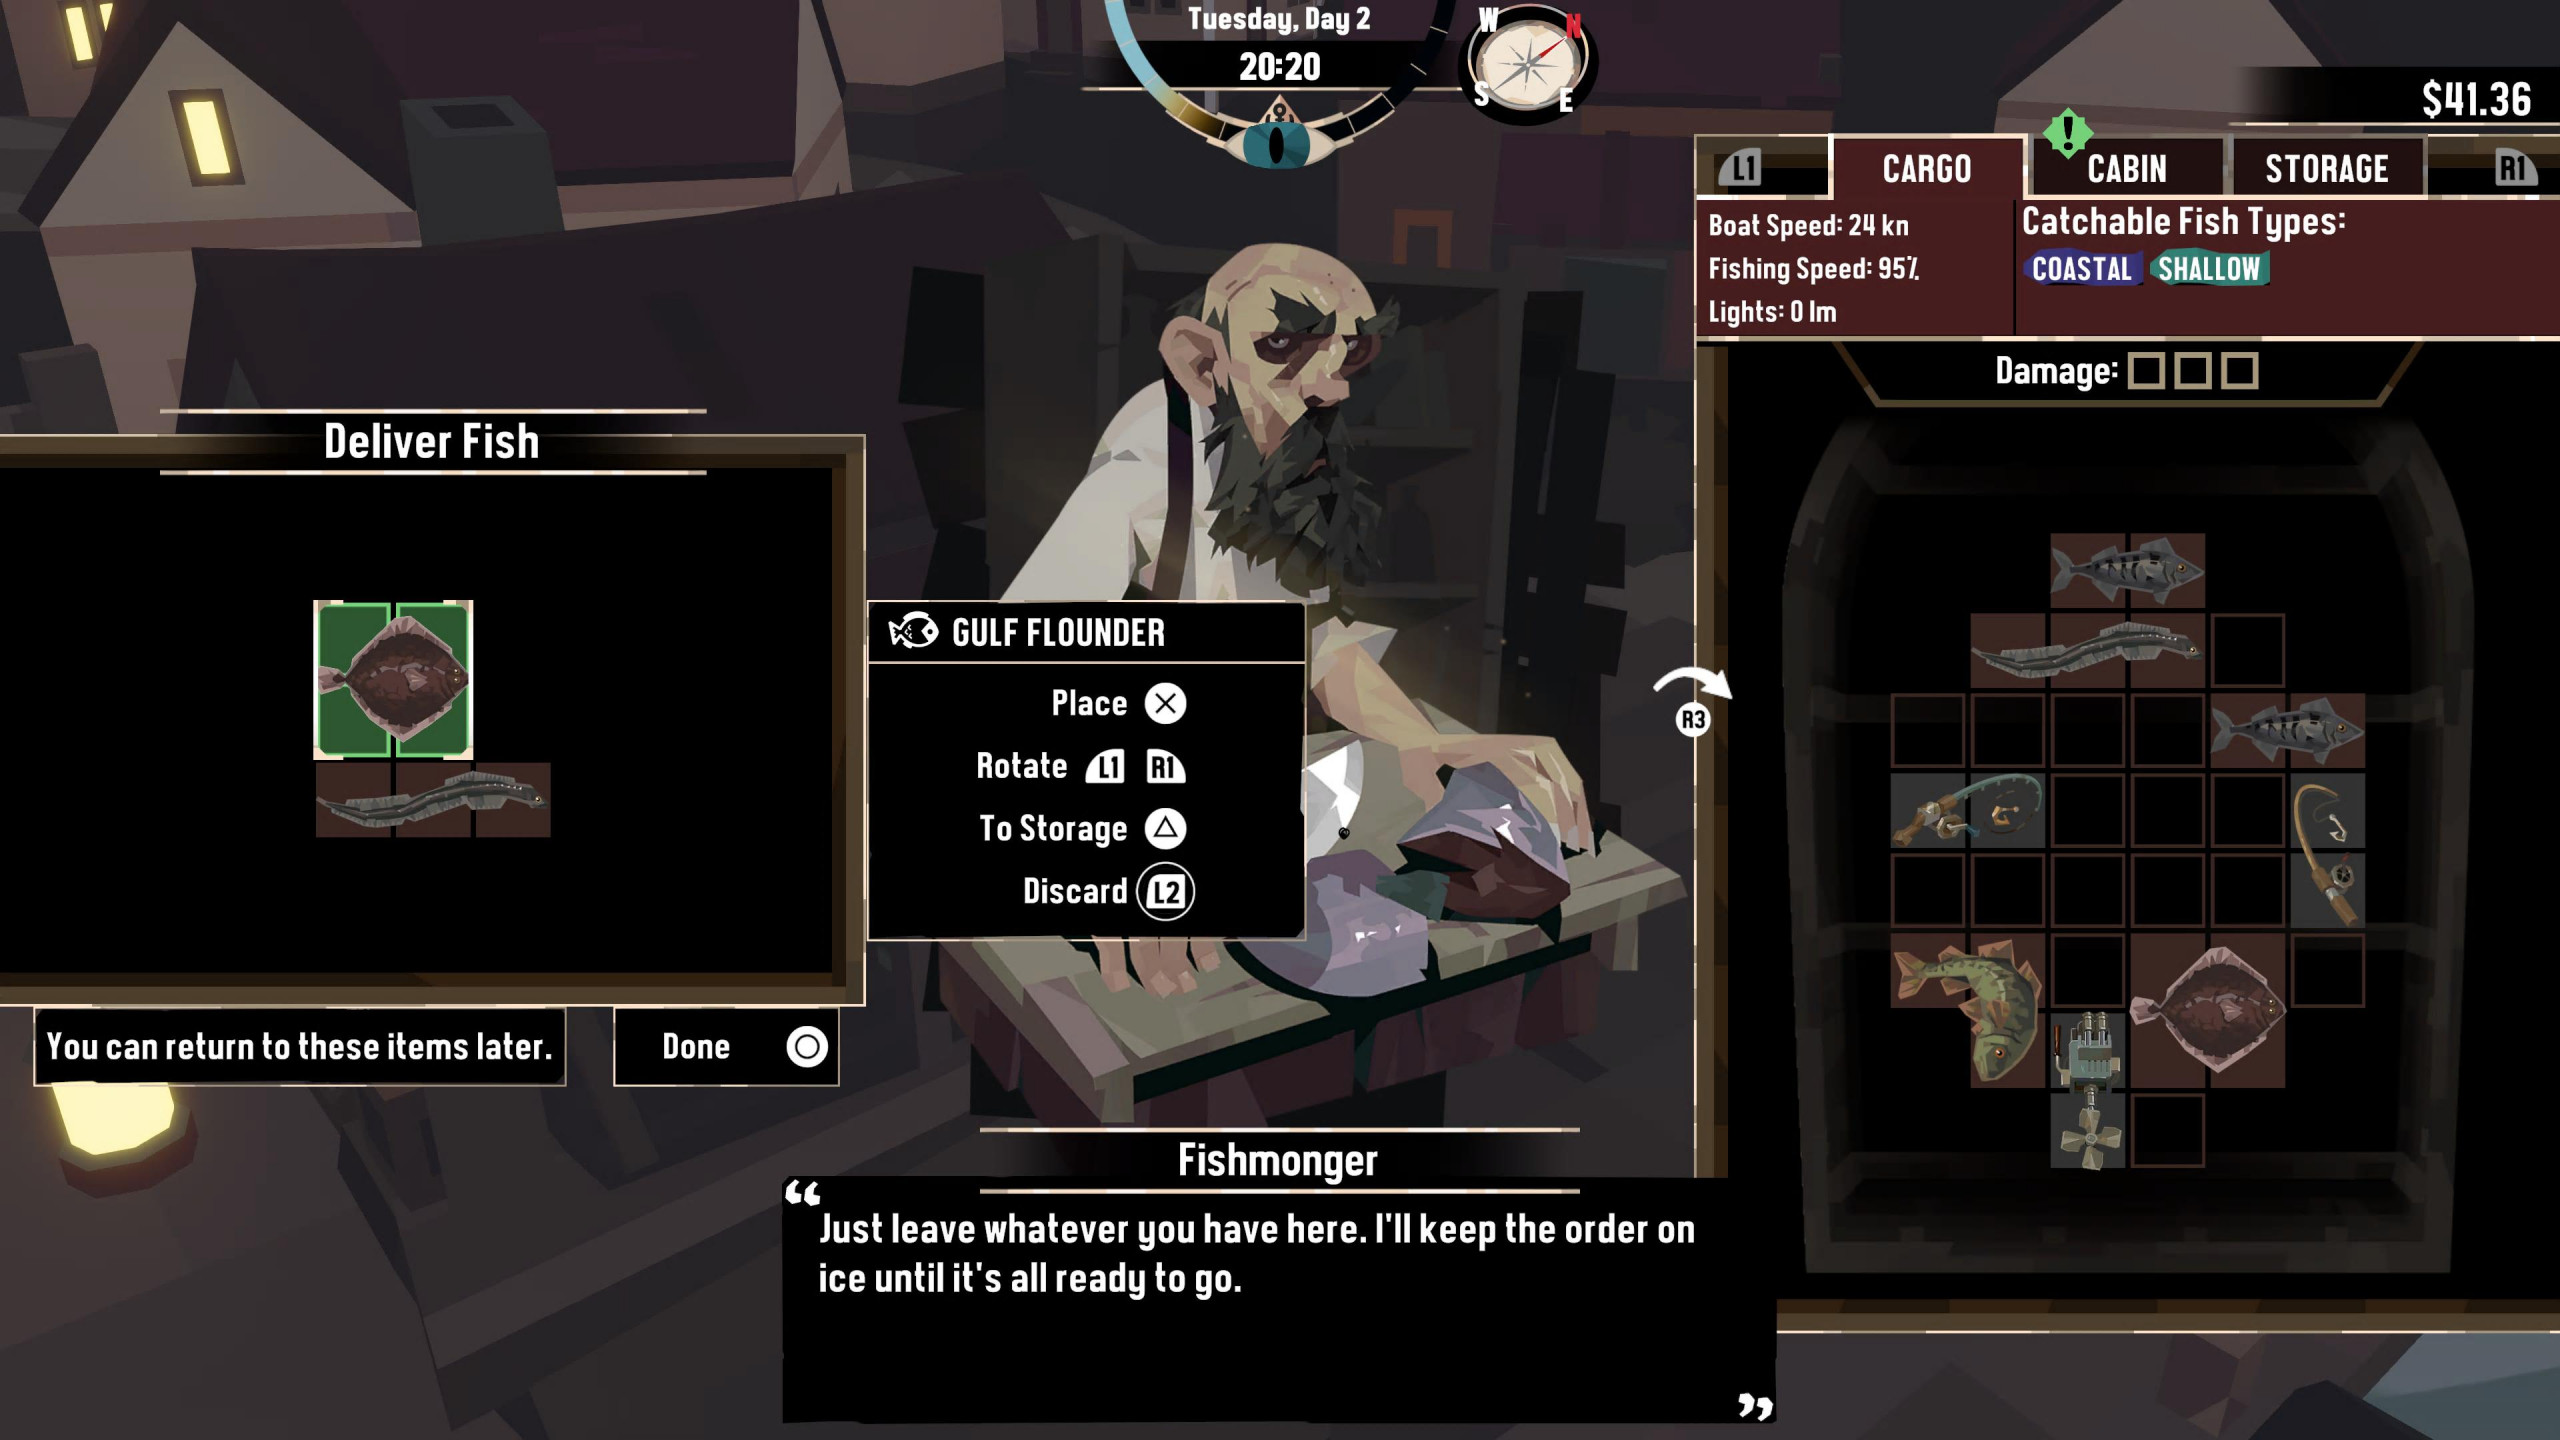 dialogue with a haggered looking fishmonger. The time, day and date is displayed at top center alongside a compass. A user interface showing a cargo of different fish held in cargo slots. The center of the screen shows a legend of controls for the player. The dialogue is transcribed at the bottom of the screen with the Fishmonger saying "Just leave whatever you have here. I'll keep the order on ice until it's all ready to go."